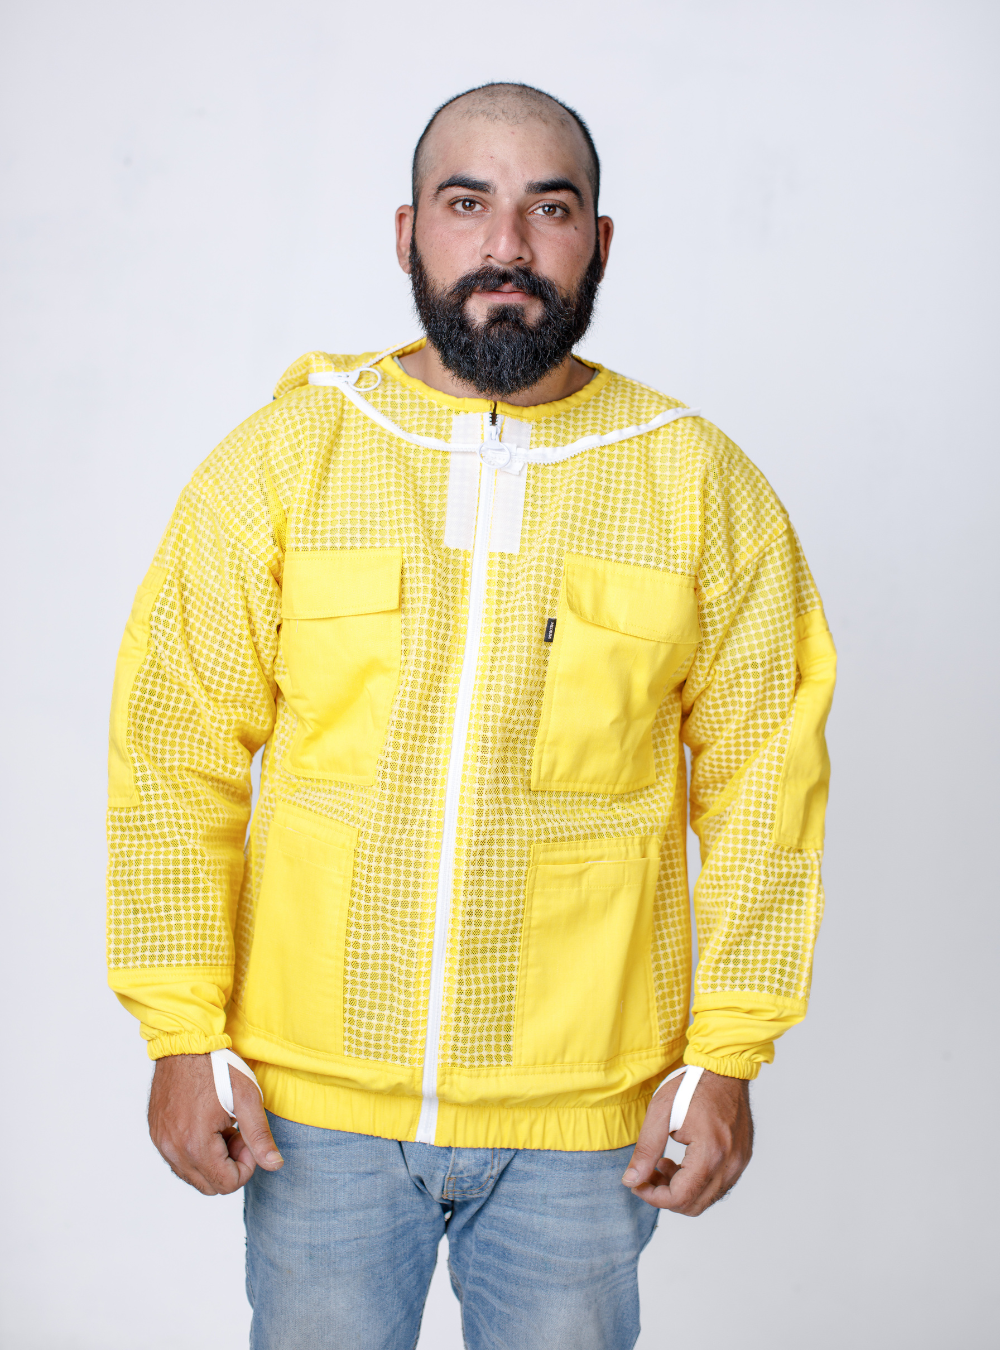 Stylish yet functional Yellow Beekeeping Ventilated Jacket in beige with a patterned mesh body, combining safety with modern aesthetics for beekeepers.